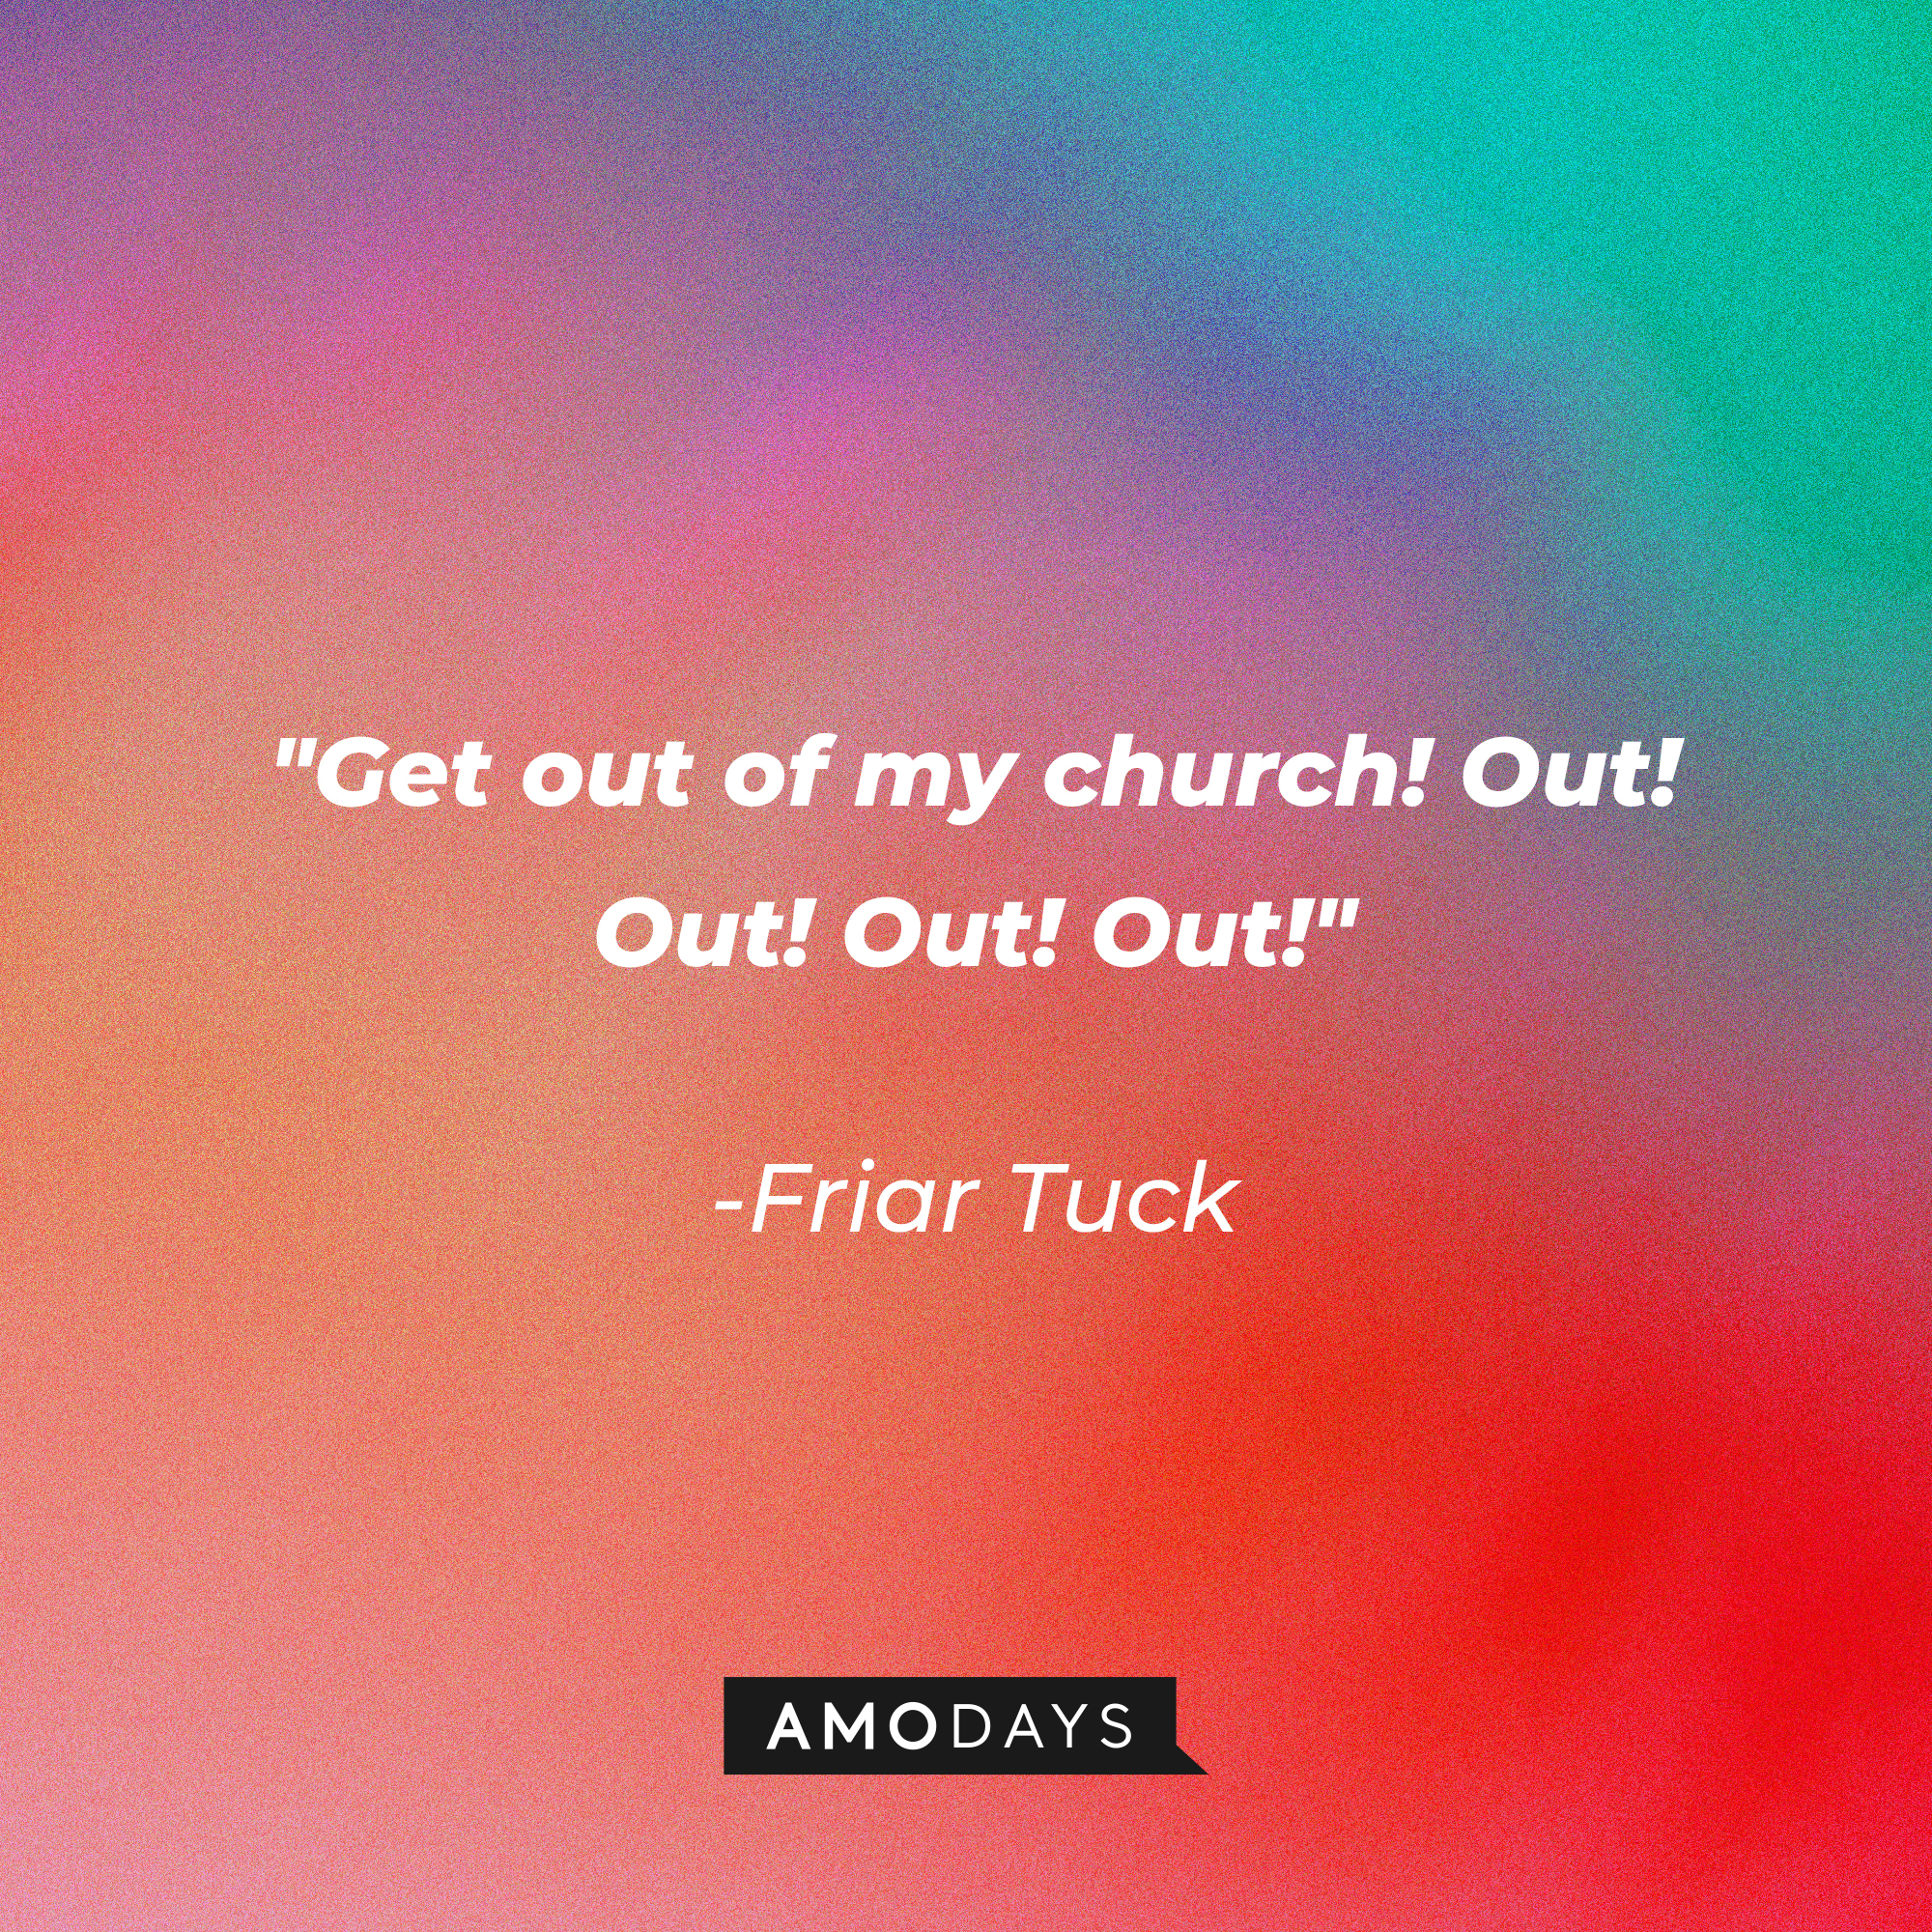 Friar Tuck's quote: "Get out of my church! Out! Out! Out! Out!" | Source: Amodays